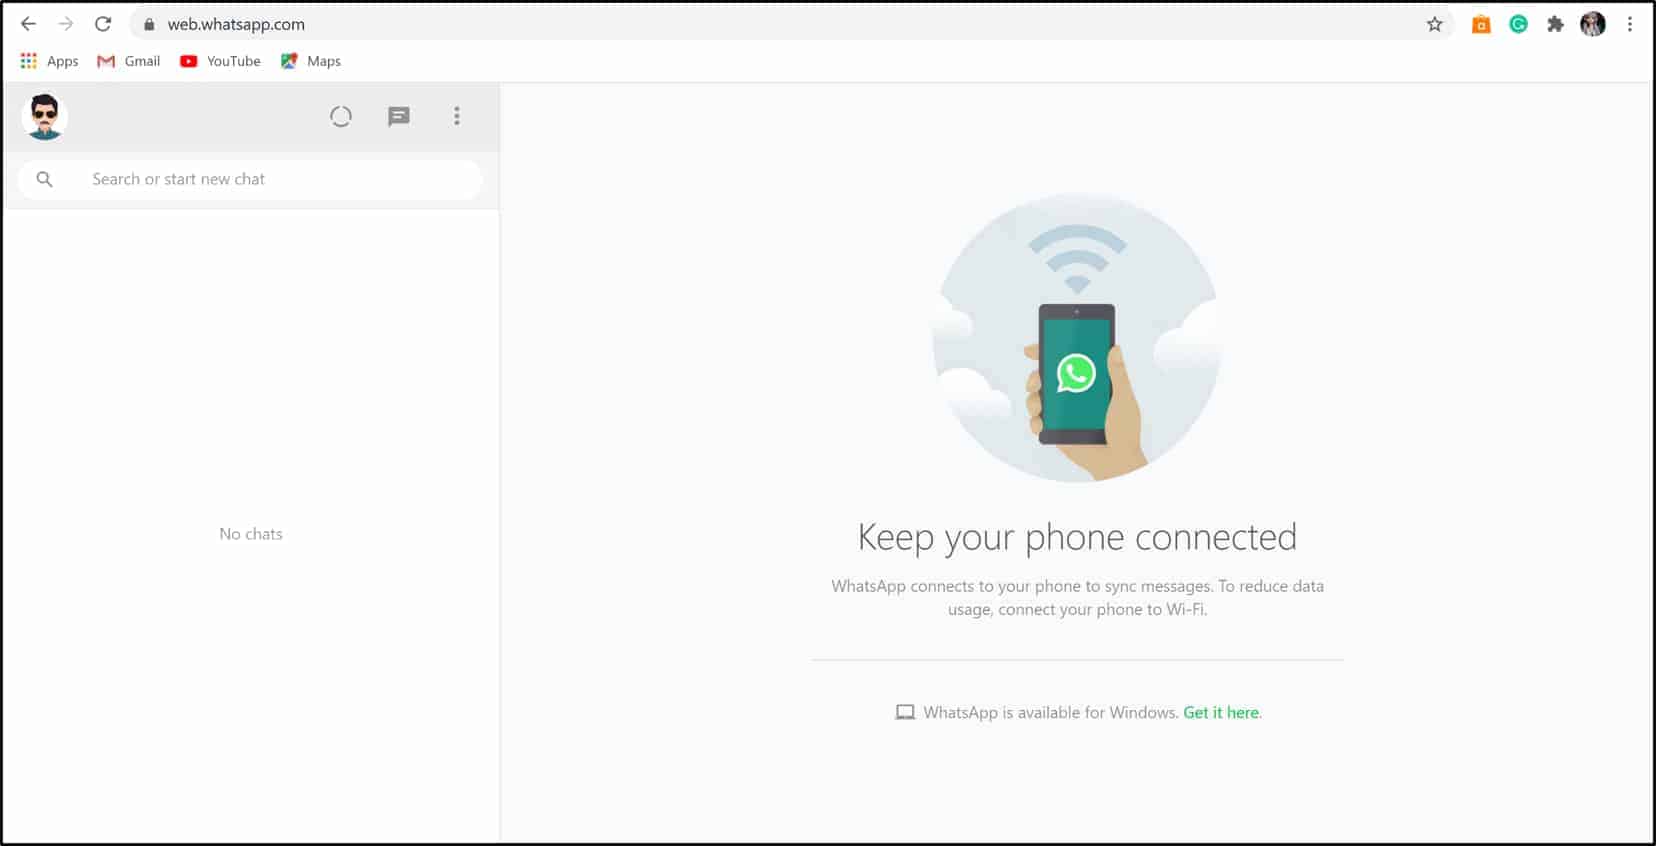 how to login whatsapp in laptop without phone